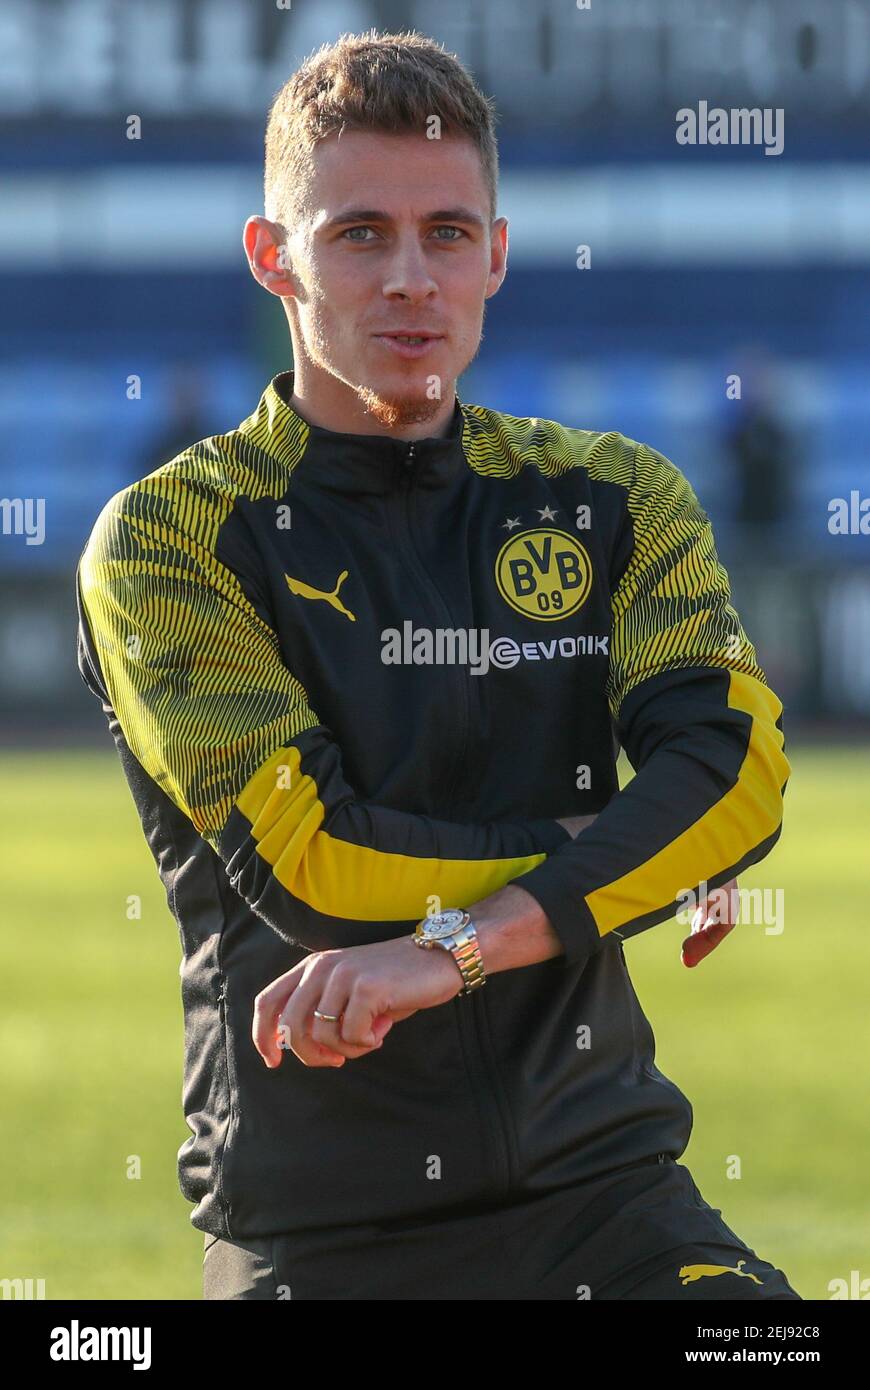 Dortmund's Thorgan Hazard pictured during a friendly soccer game between Belgian team Standard de Liege and German club Borussia Dortmund at their the winter training camps in Marbella, Spain, Tuesday 07 January 2020. BELGA PHOTO VIRGINIE LEFOUR (Photo by VIRGINIE LEFOUR/Belga/Sipa USA) Stock Photo